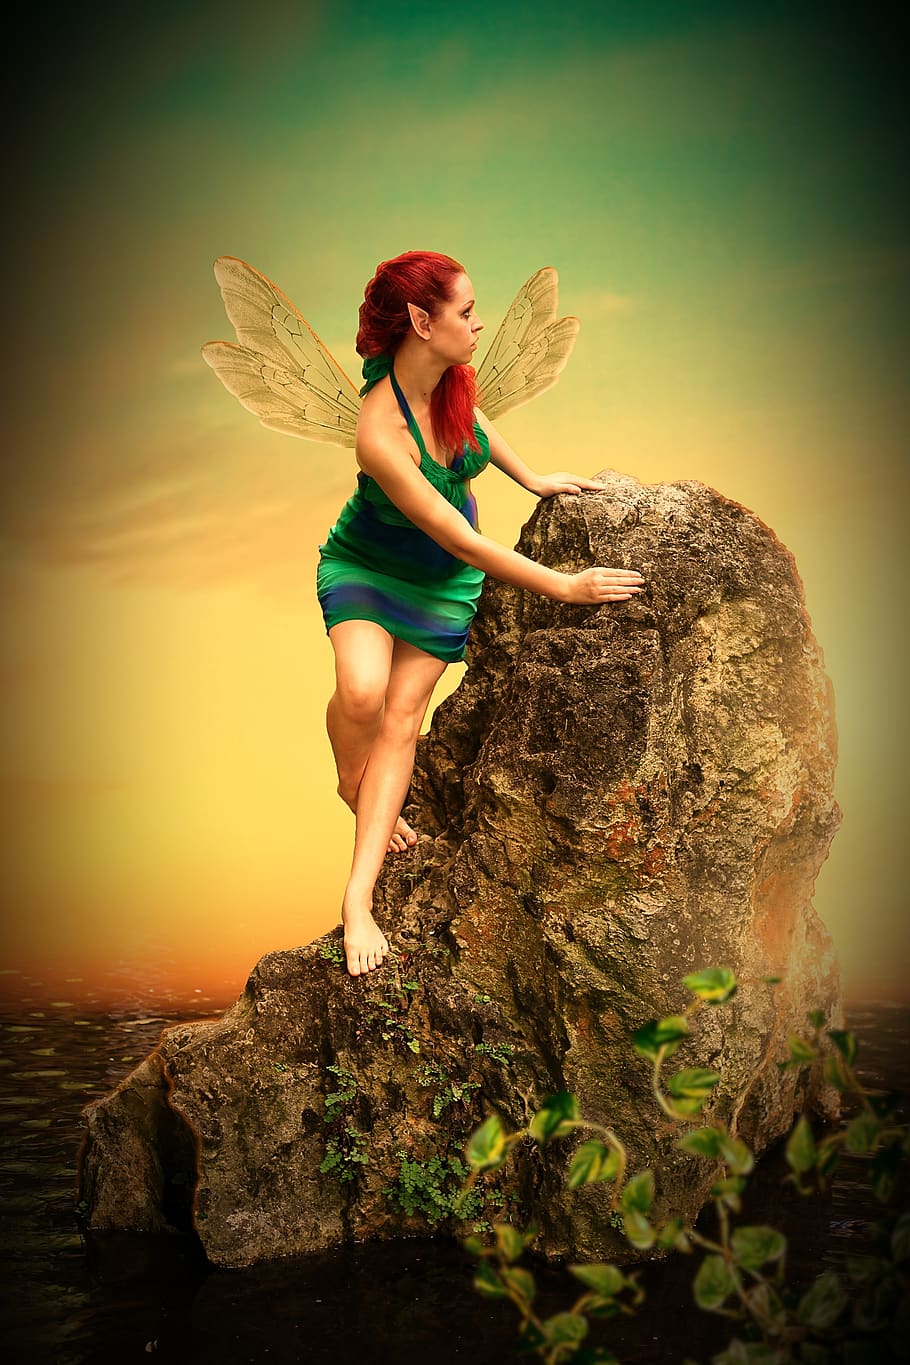 fee, elf, woman, wing, fantasy, fairytale, mythical creatures, rock, mountain, light